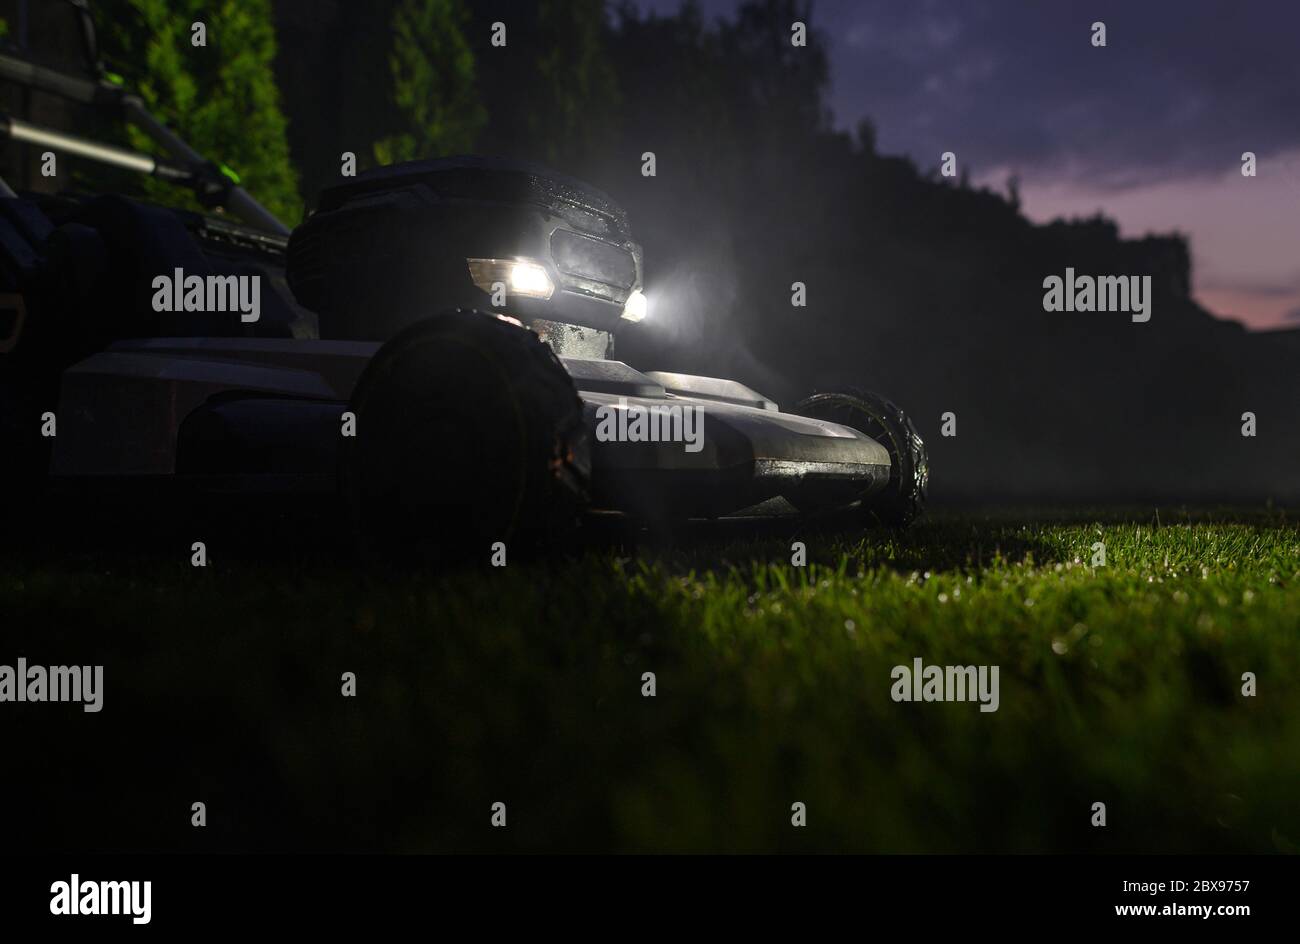 Backyard Grass Mowing During Late Summer Evening Hours. Modern Electric Grass Mower with LED Head Lights. Stock Photo